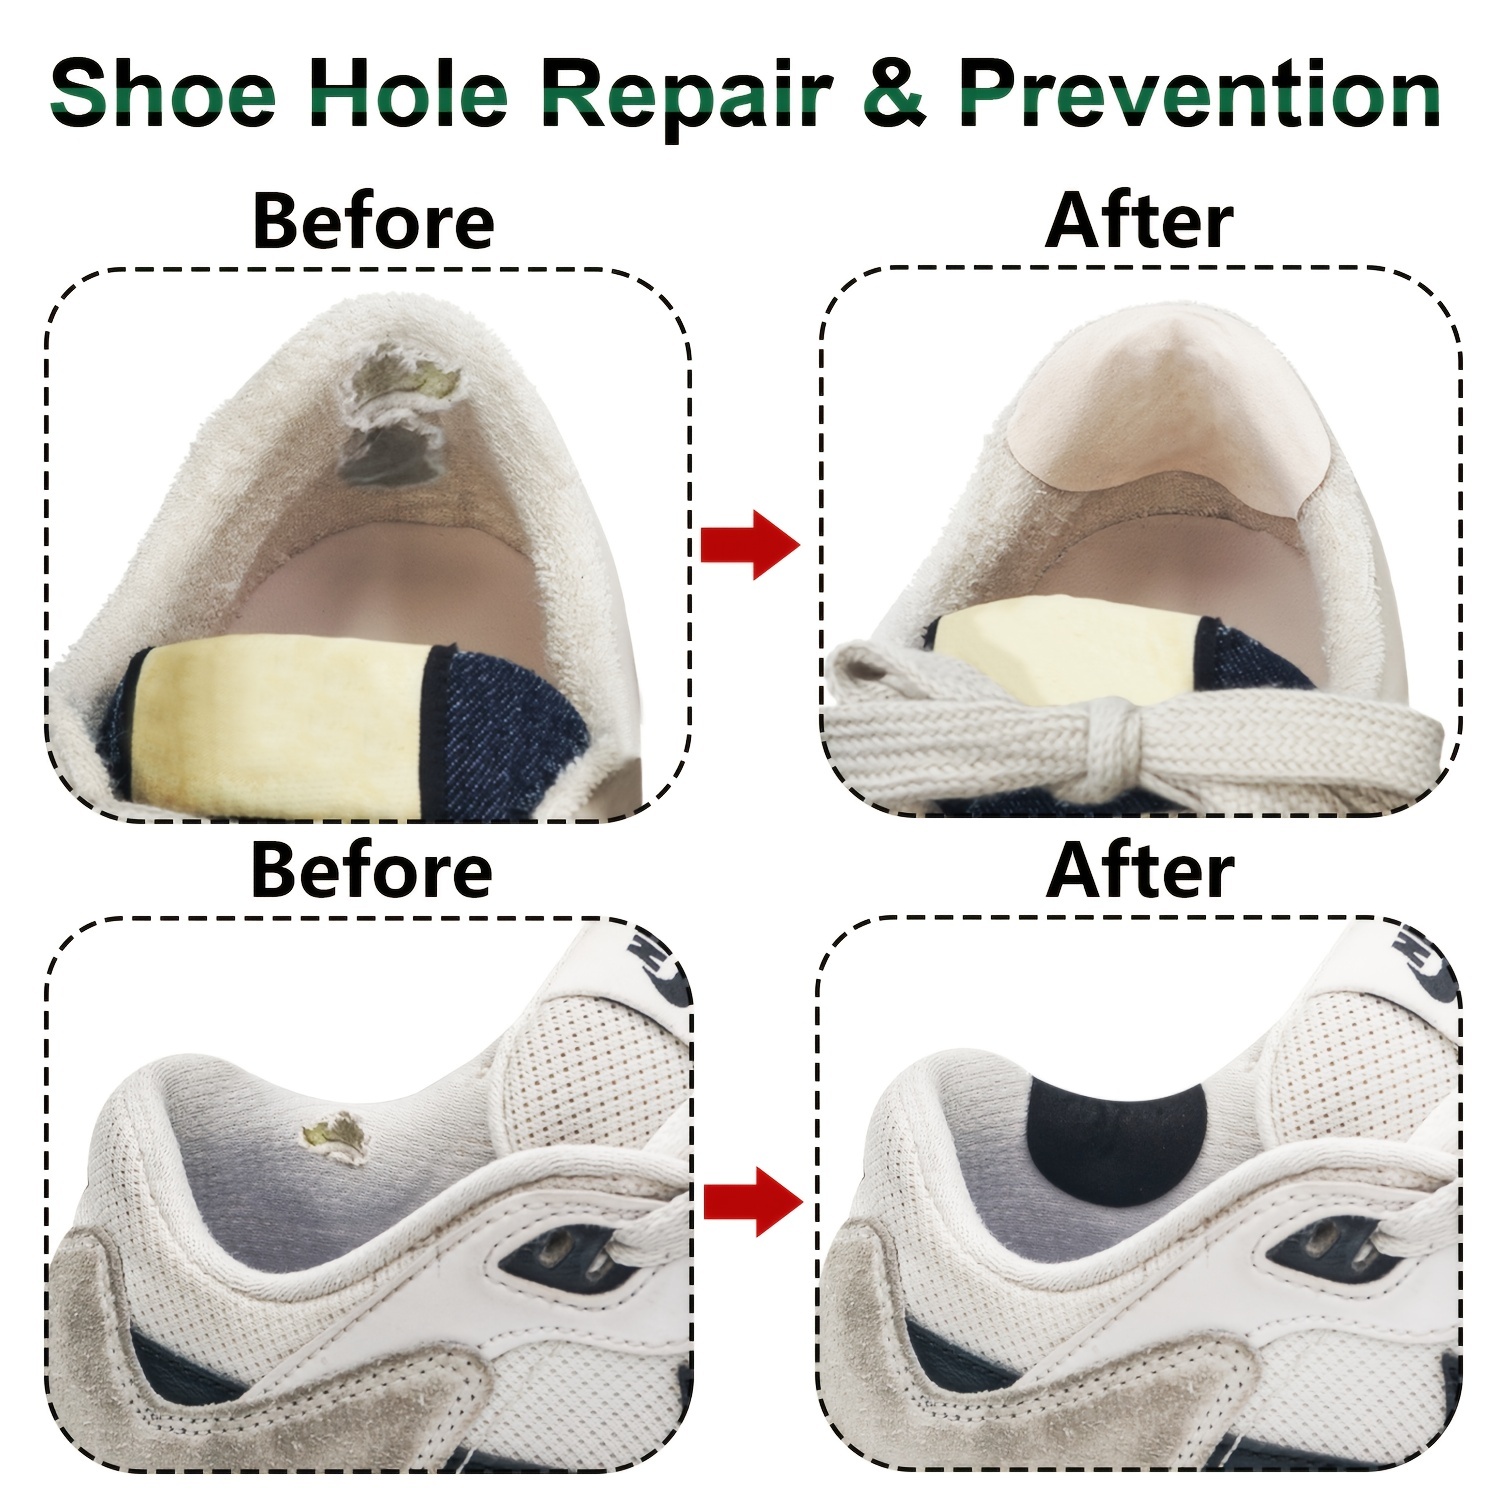 Shoe Heel Repair, 2 Pairs Self-adhesive Inside Shoe Patches For Holes, Shoe  Hole Repair Patch Kit -ys